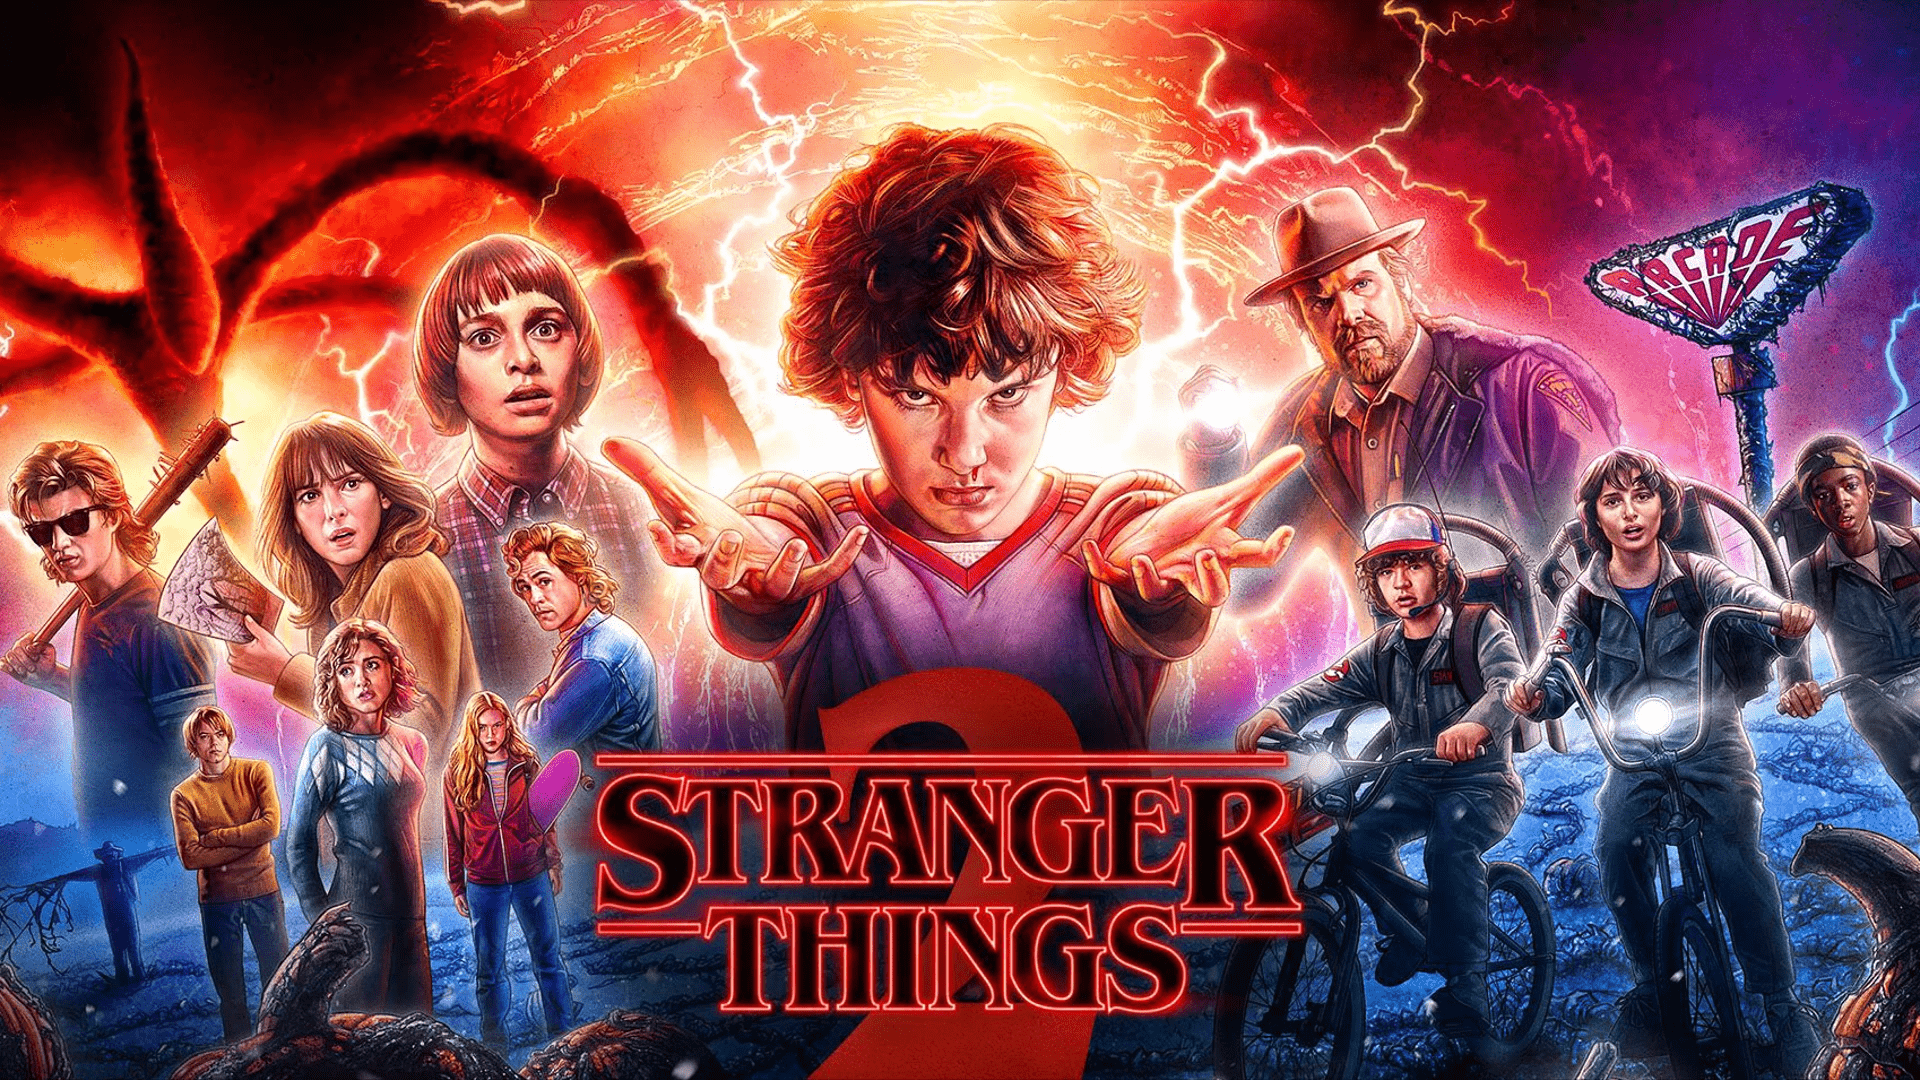 Stranger Things 2 promotional poster with the characters in a group surrounded by lightning. - Stranger Things